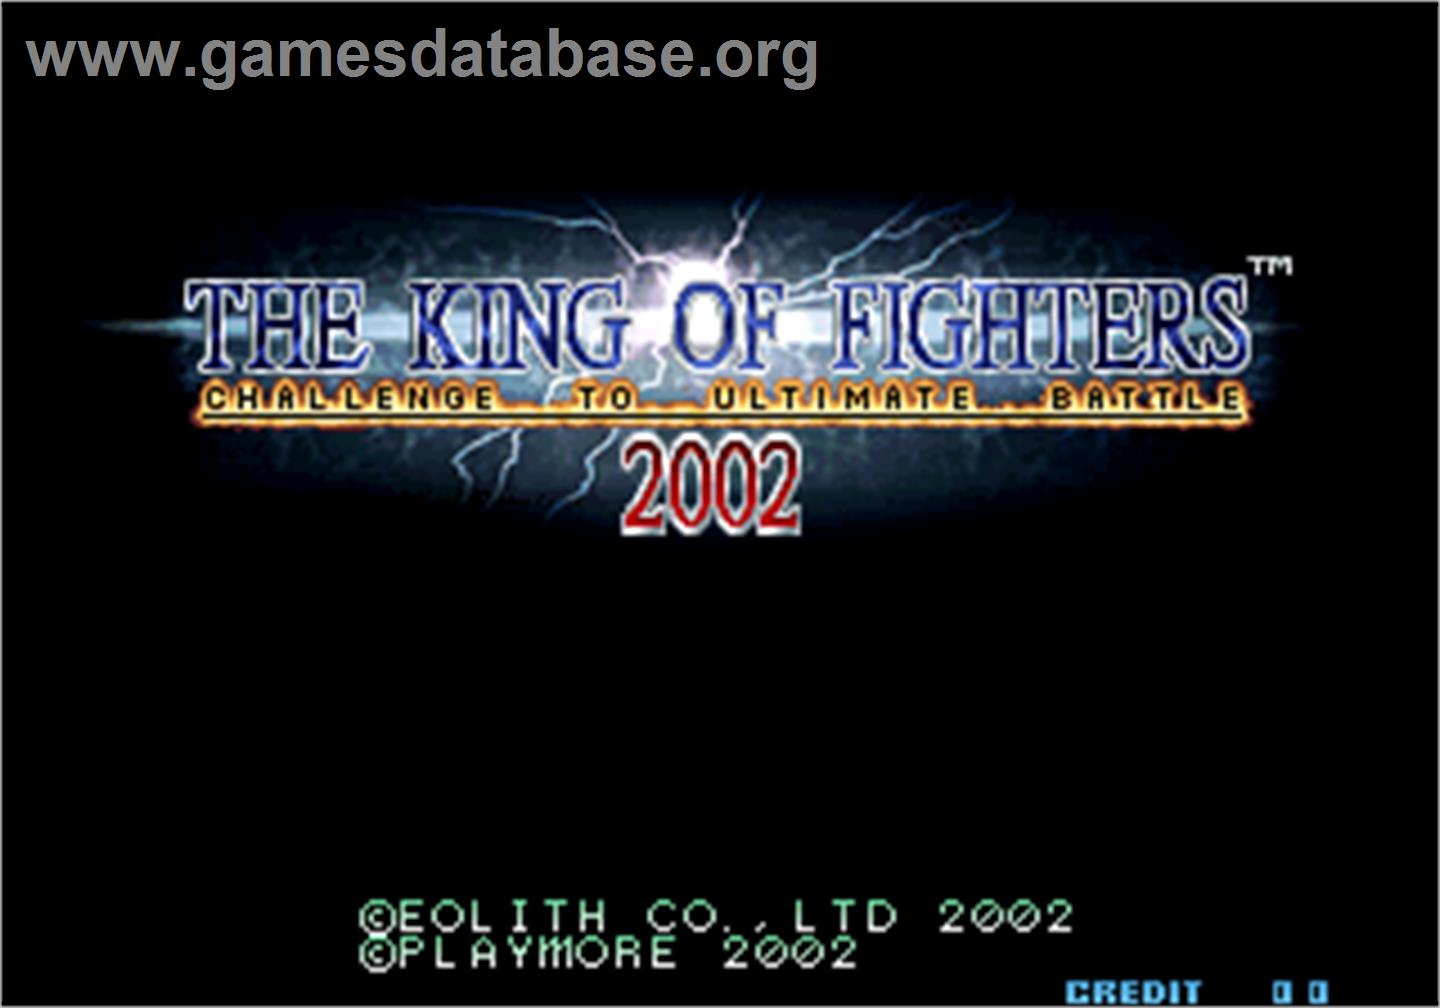 The King of Fighters 2002 - Arcade - Artwork - Title Screen